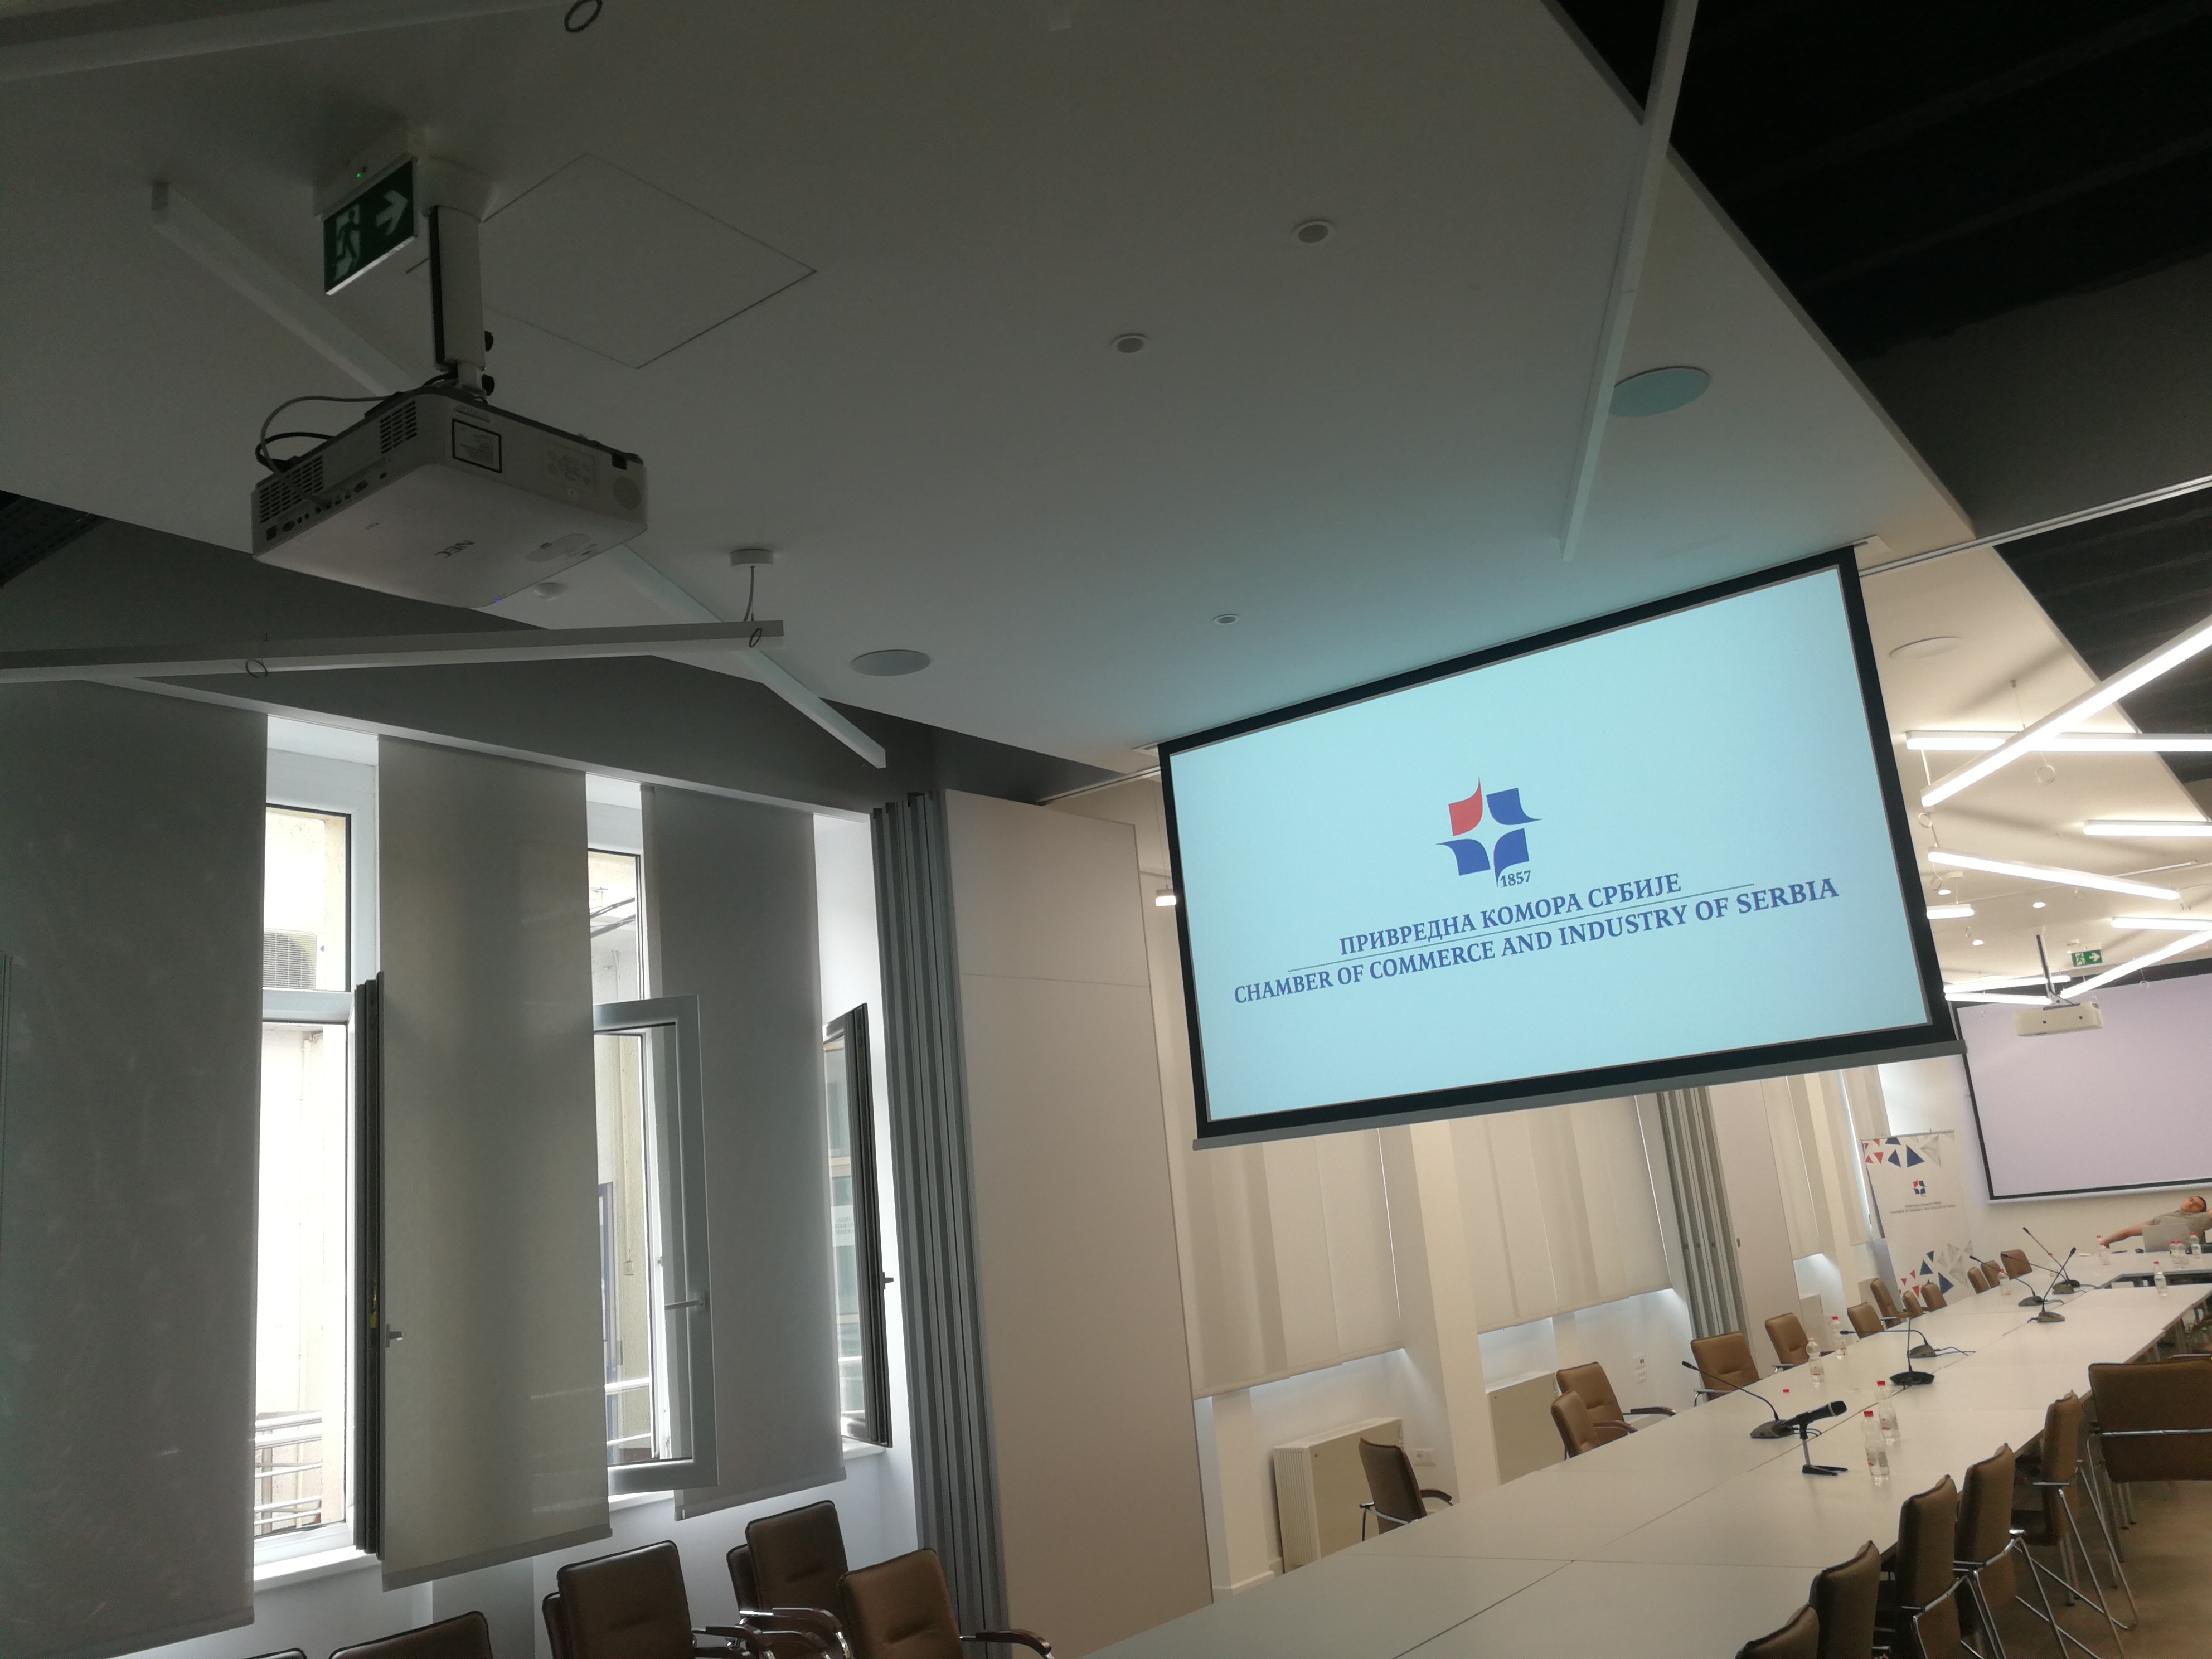 Small conference room at Serbian Chamber of Commerce in Belgrade